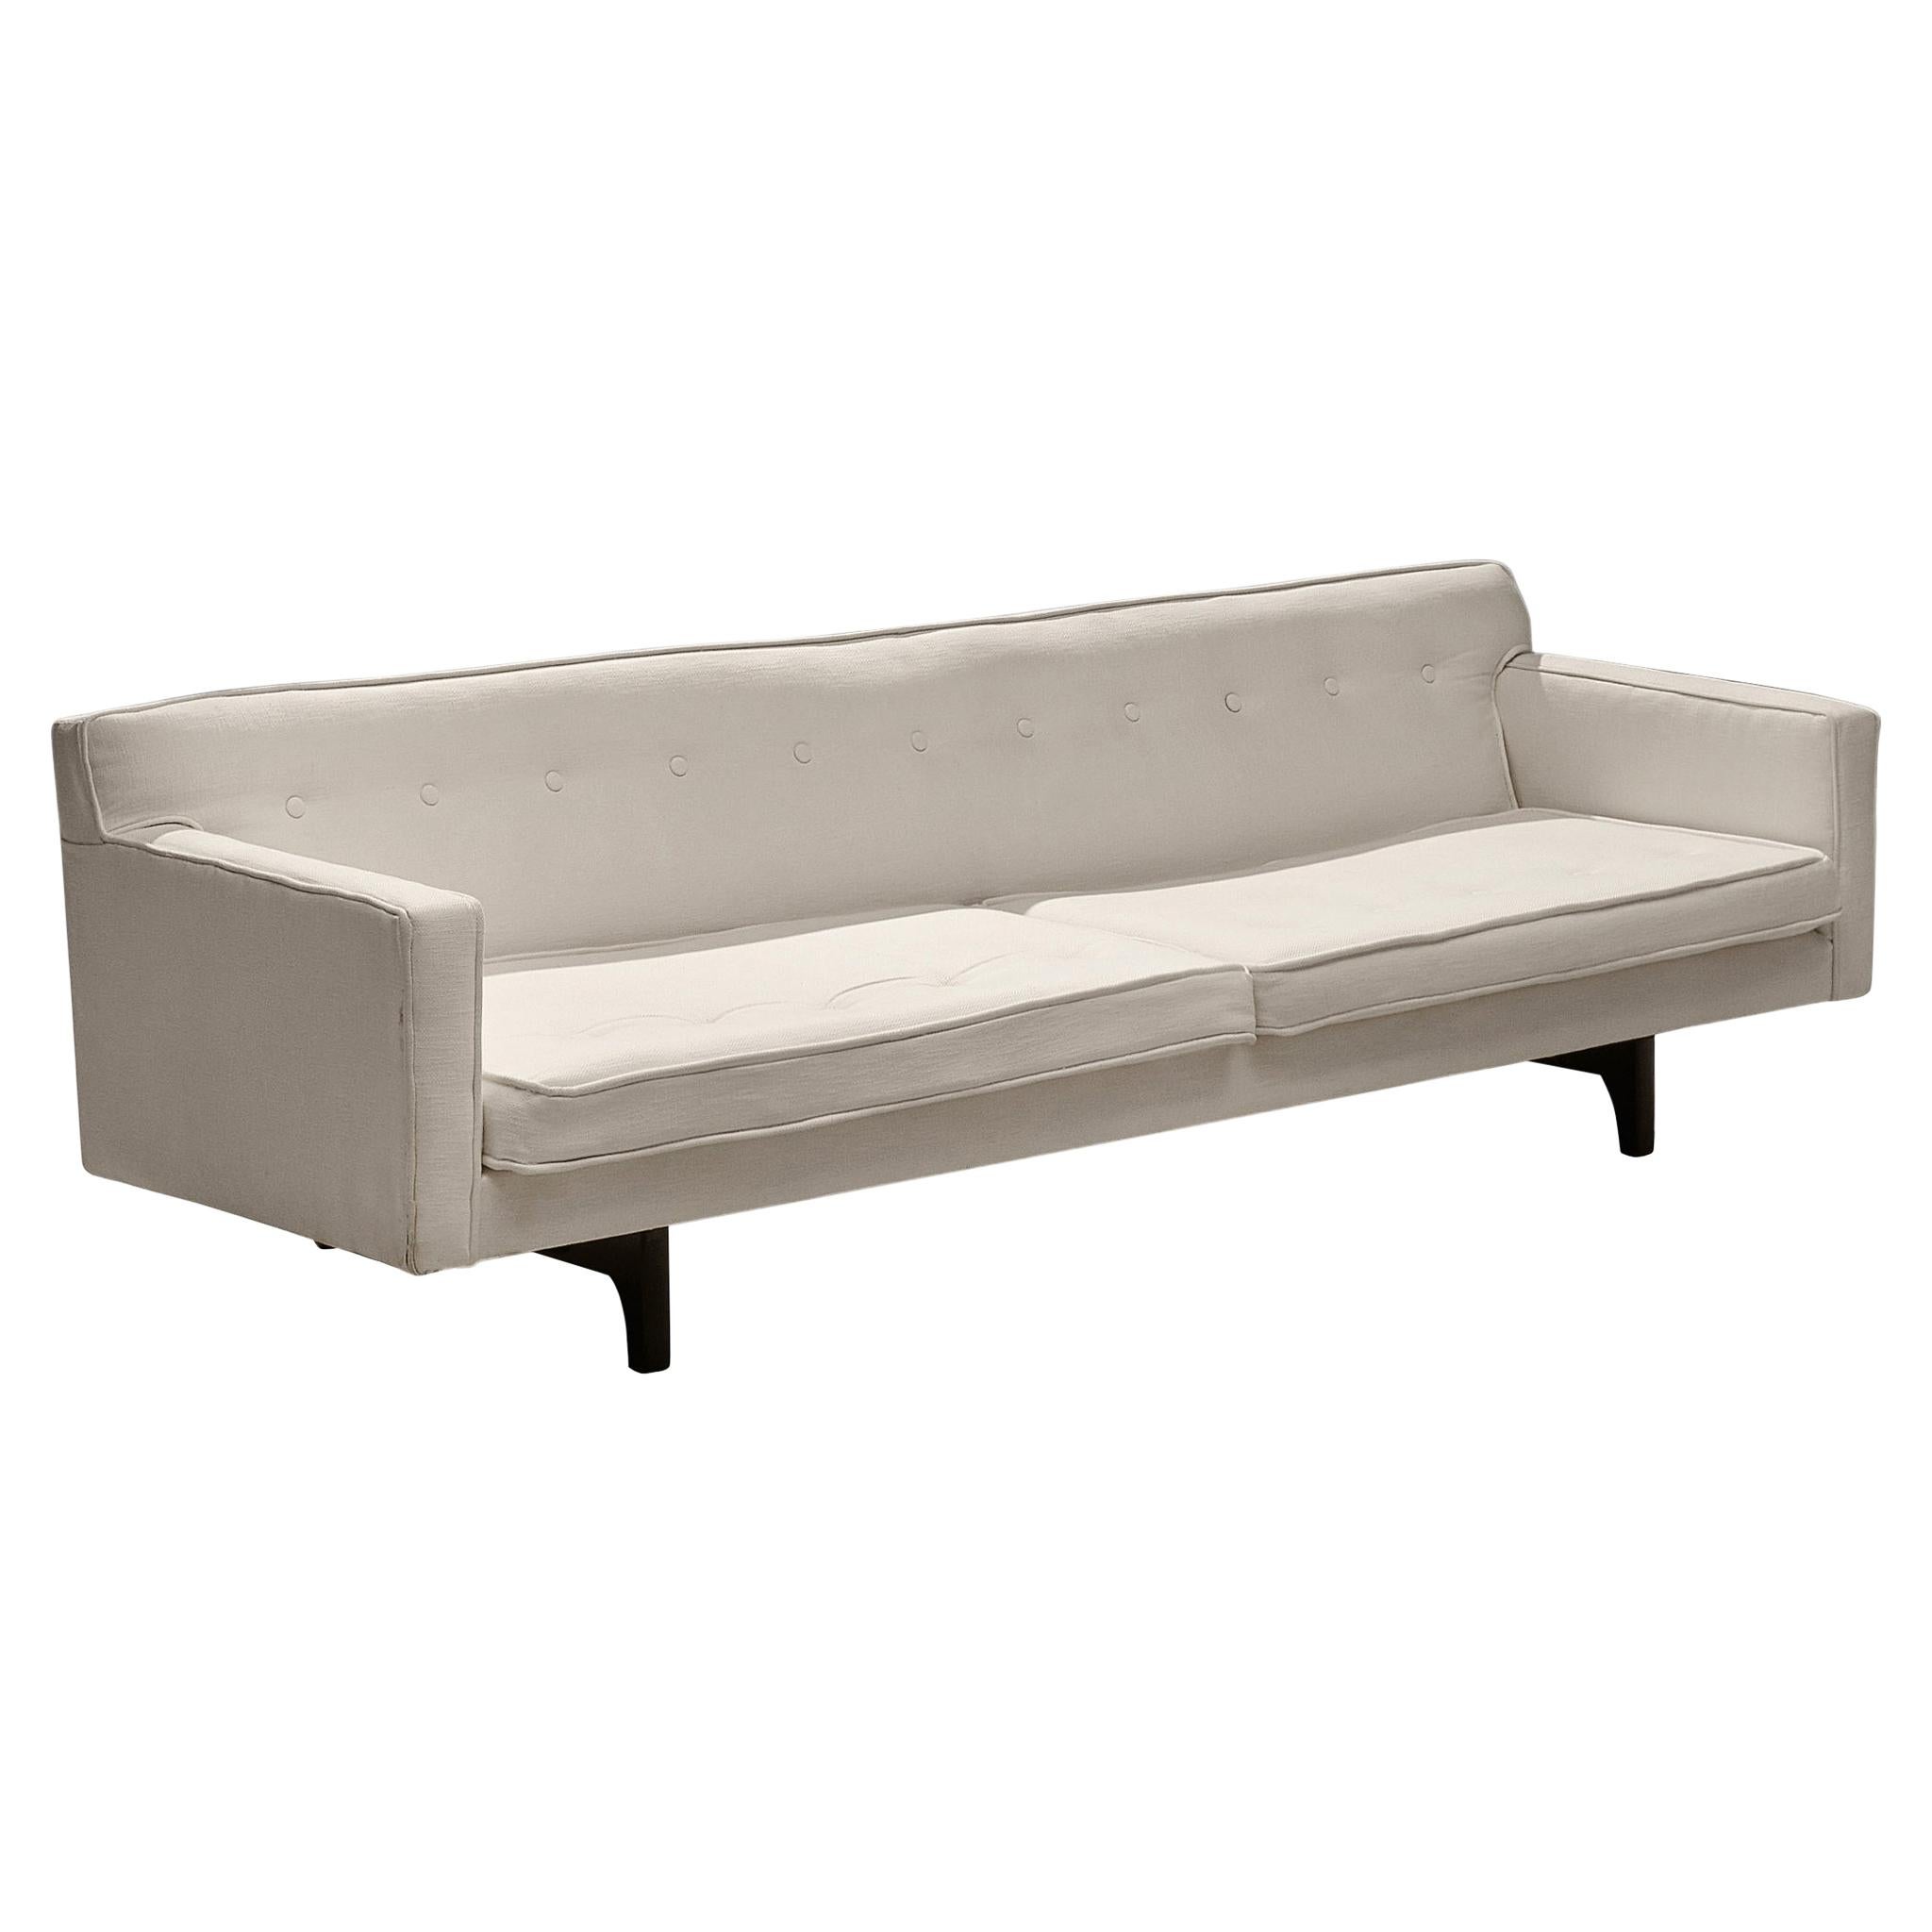 Edward Wormley for Dunbar Four-Seat Sofa in Off-White Upholstery